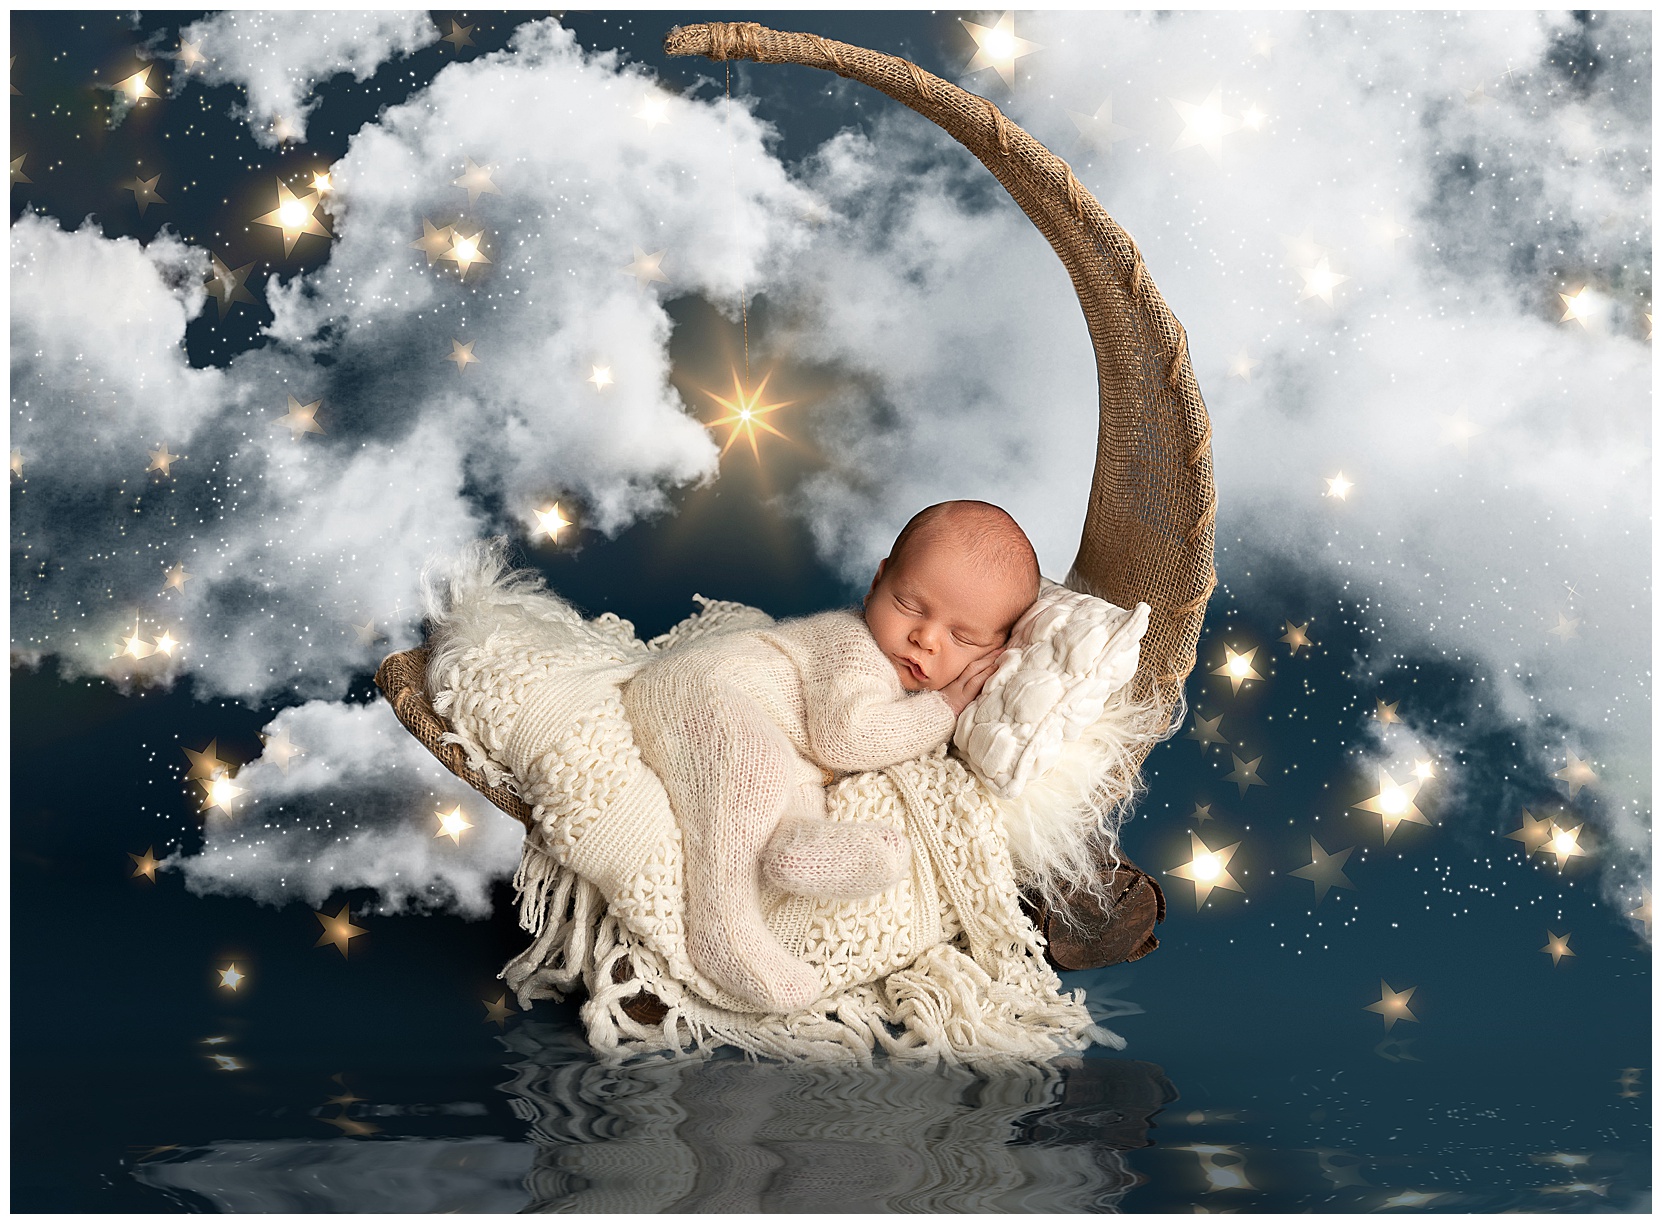 Sleepy newborn baby on a jute moon prop in front of a background of stars and clouds. Baby is swaddled in a white knit jumper and propped on a white blanket and pillow.